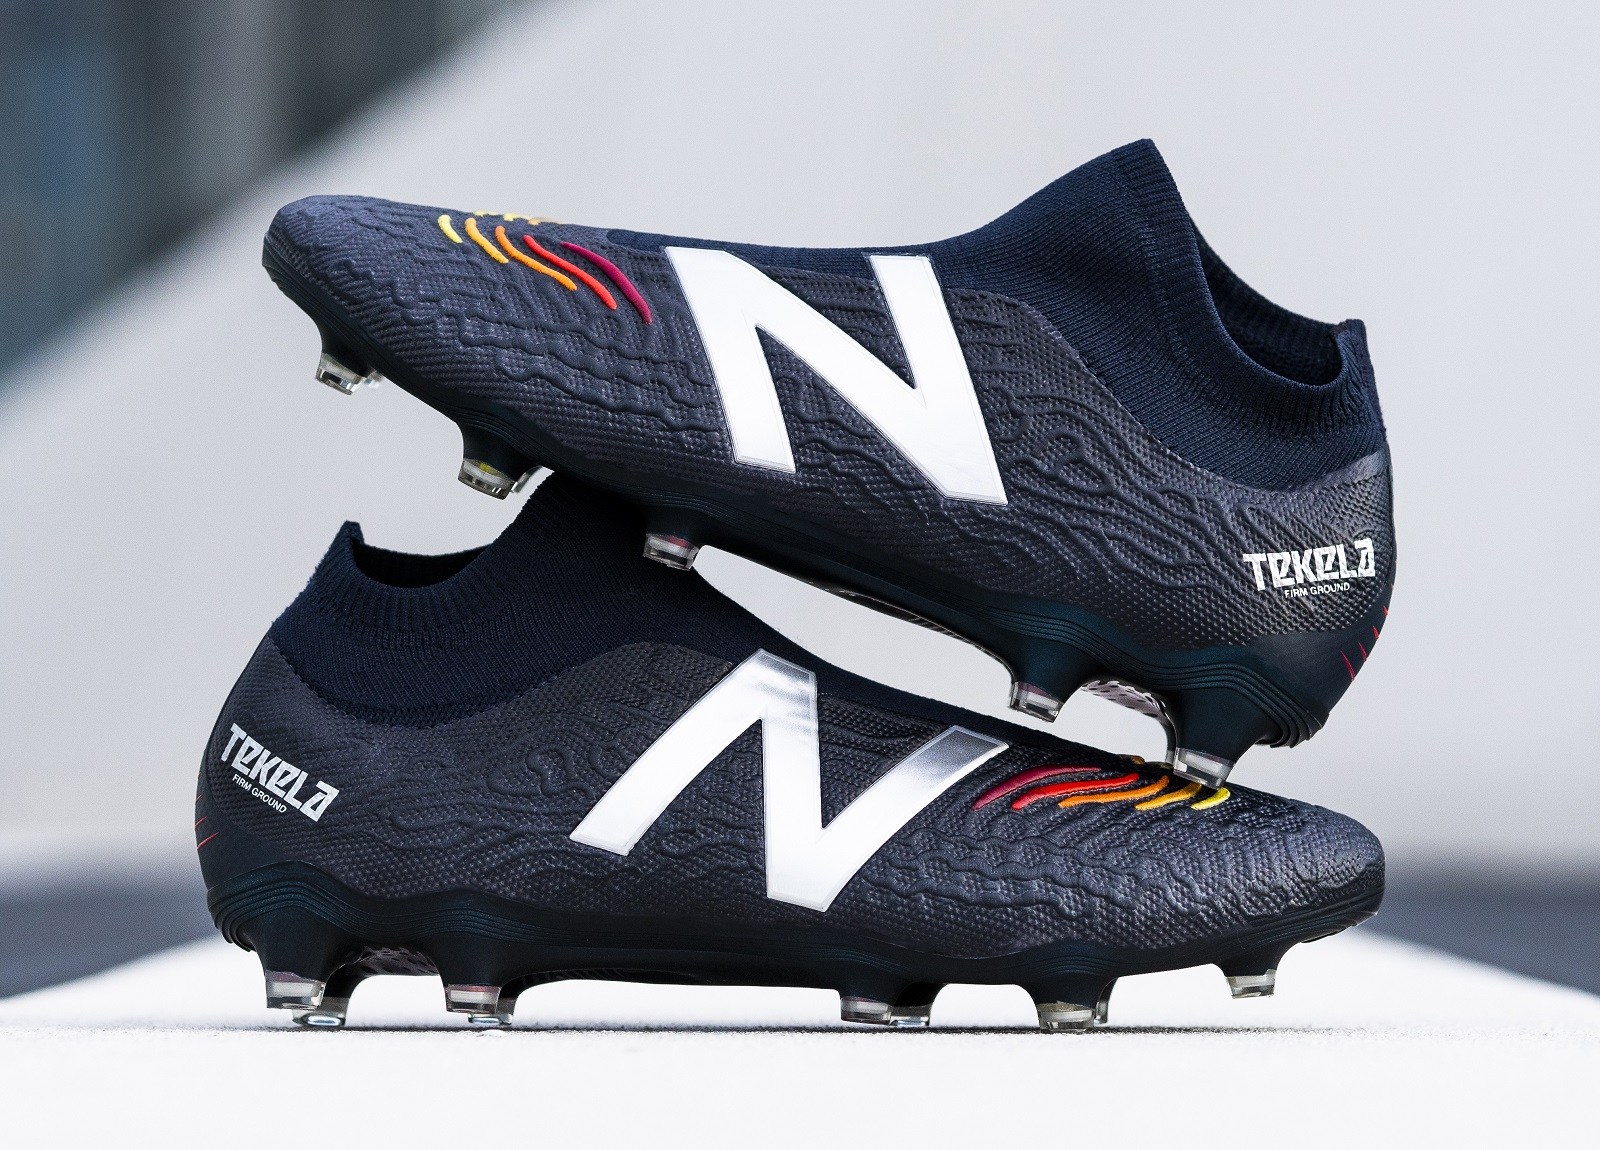 New Balance Soccer Cleats Are Moving On Up Watch Out Nike & Adidas